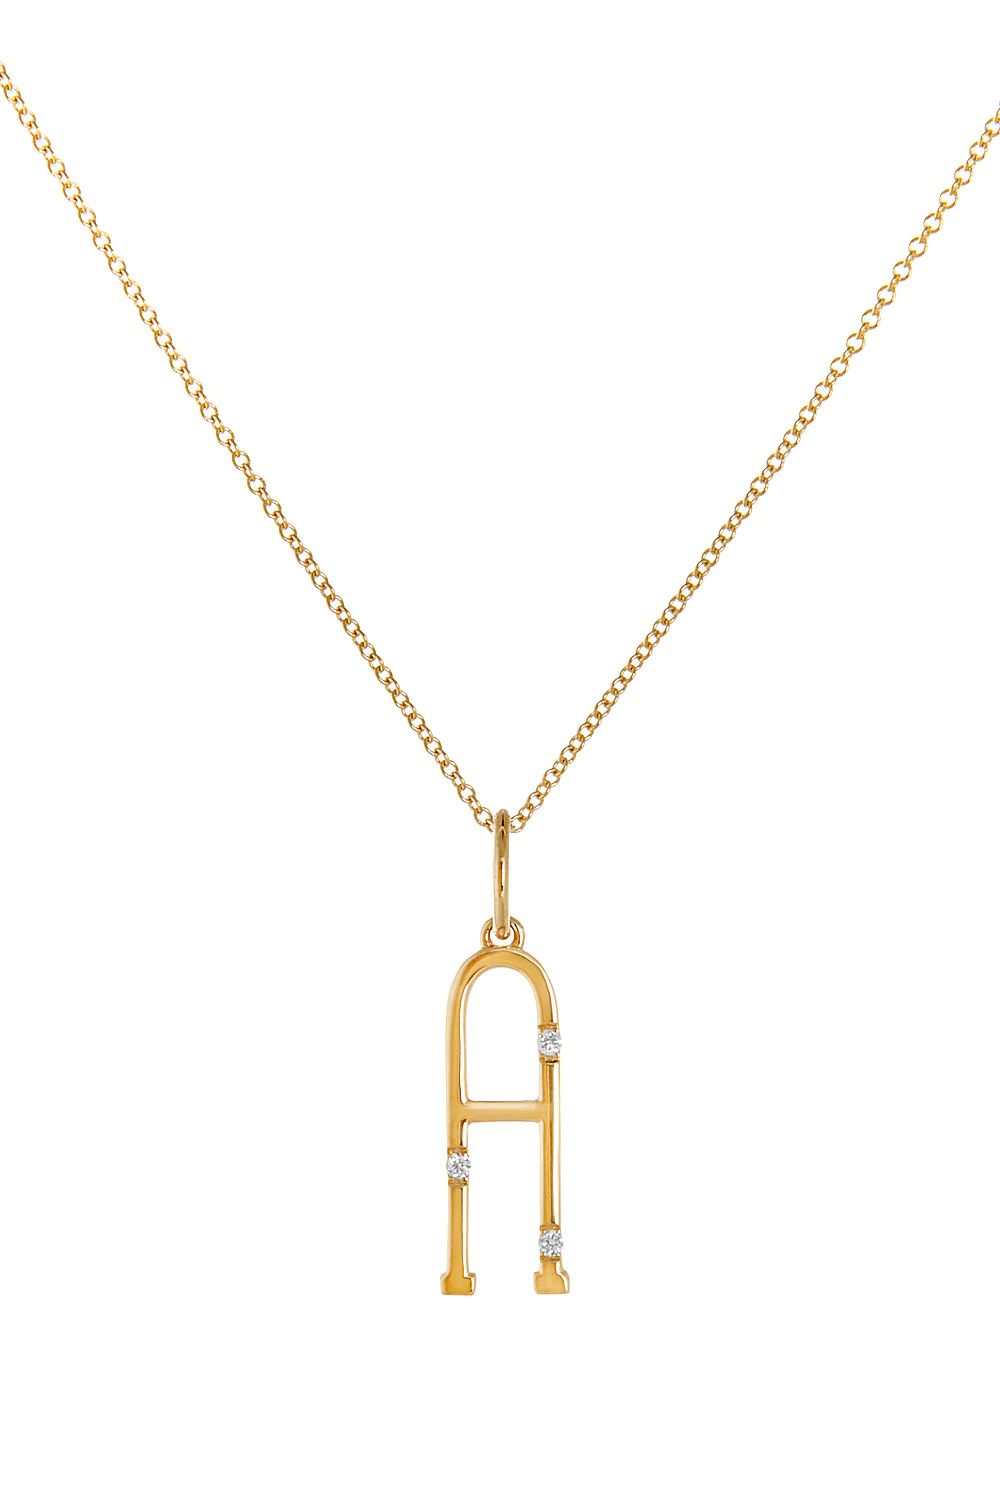 Character Charm in 18K Gold with Diamonds | Devon Woodhill